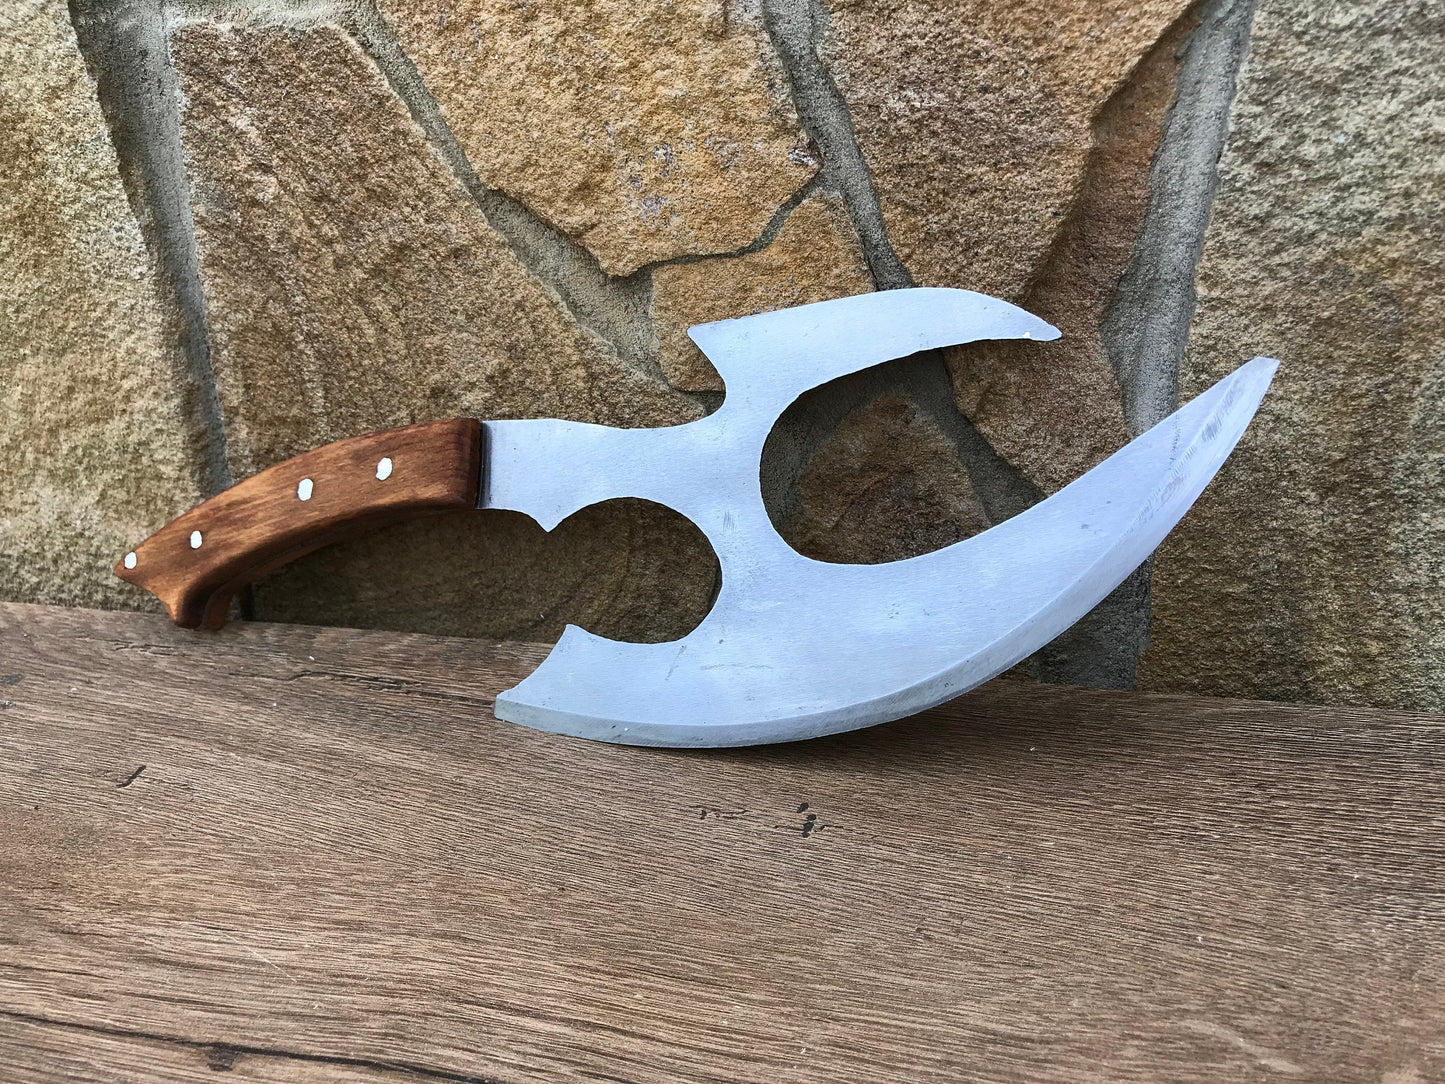 Kitchen knife, kitchen axe, viking knife, viking axe, axe, kitchen hatchet, knife, iron gifts, manly gift,mens gift,culinary knife,BBQ knife